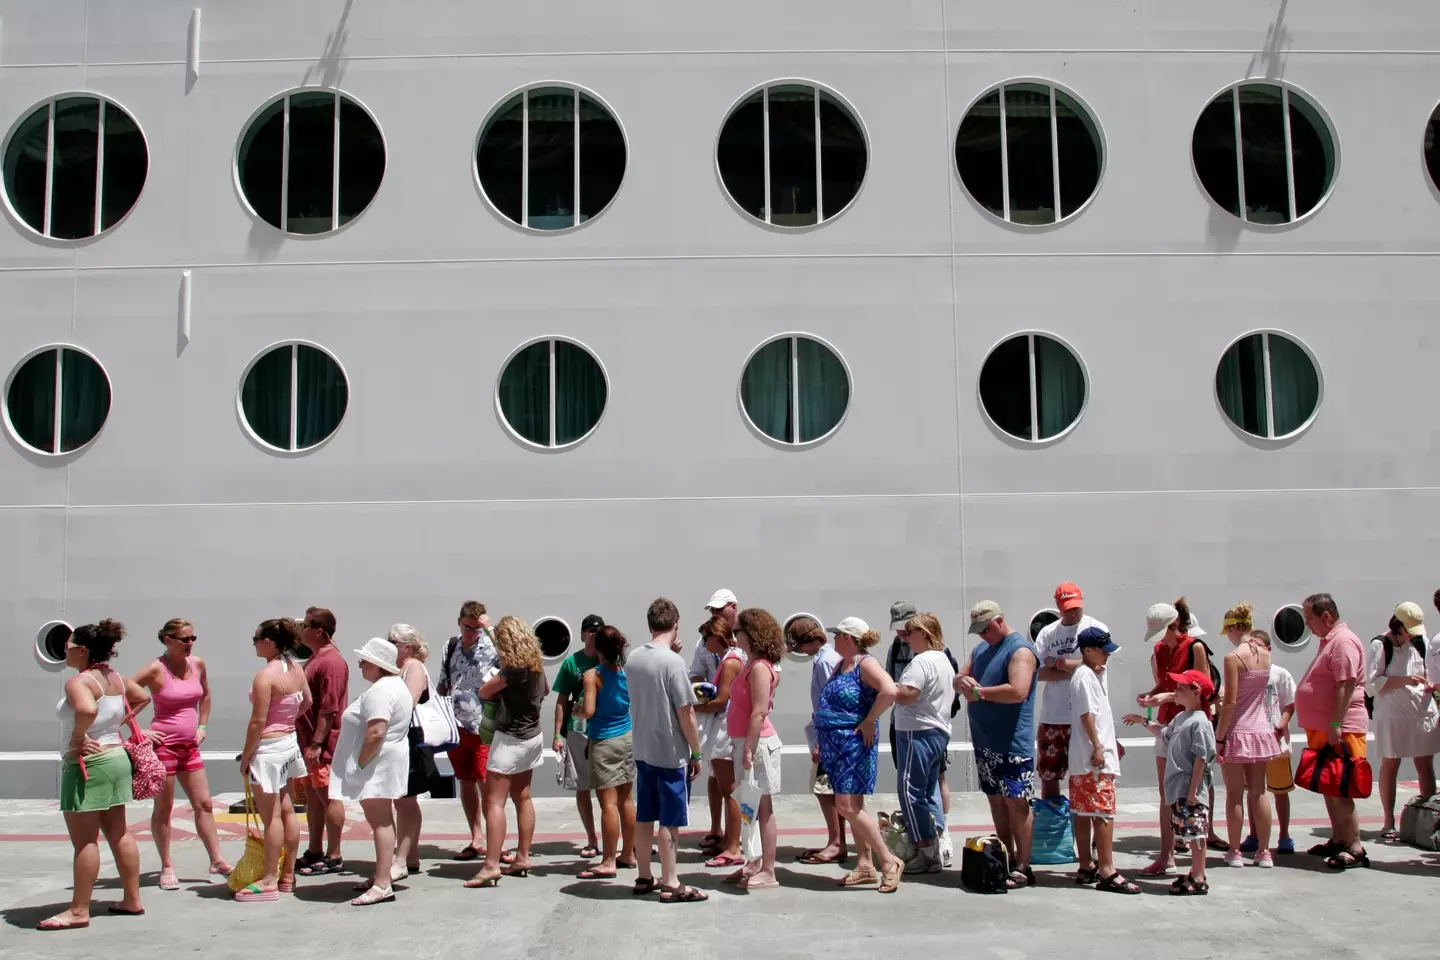 Royal Caribbean has confirmed the news of the passenger's death.